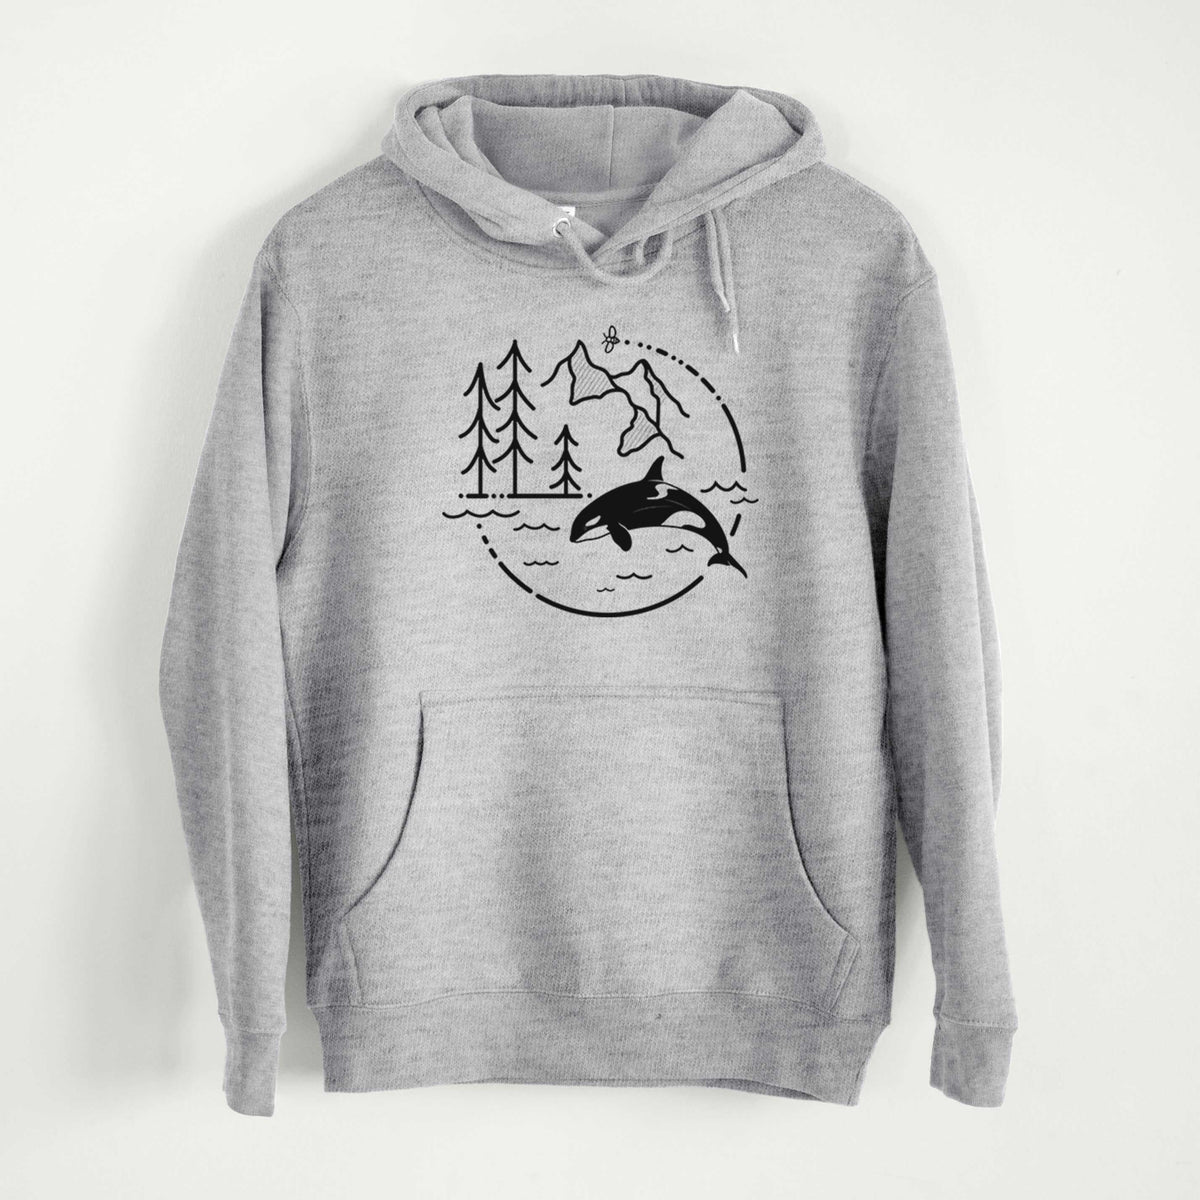 It&#39;s All Connected - Orca  - Mid-Weight Unisex Premium Blend Hoodie